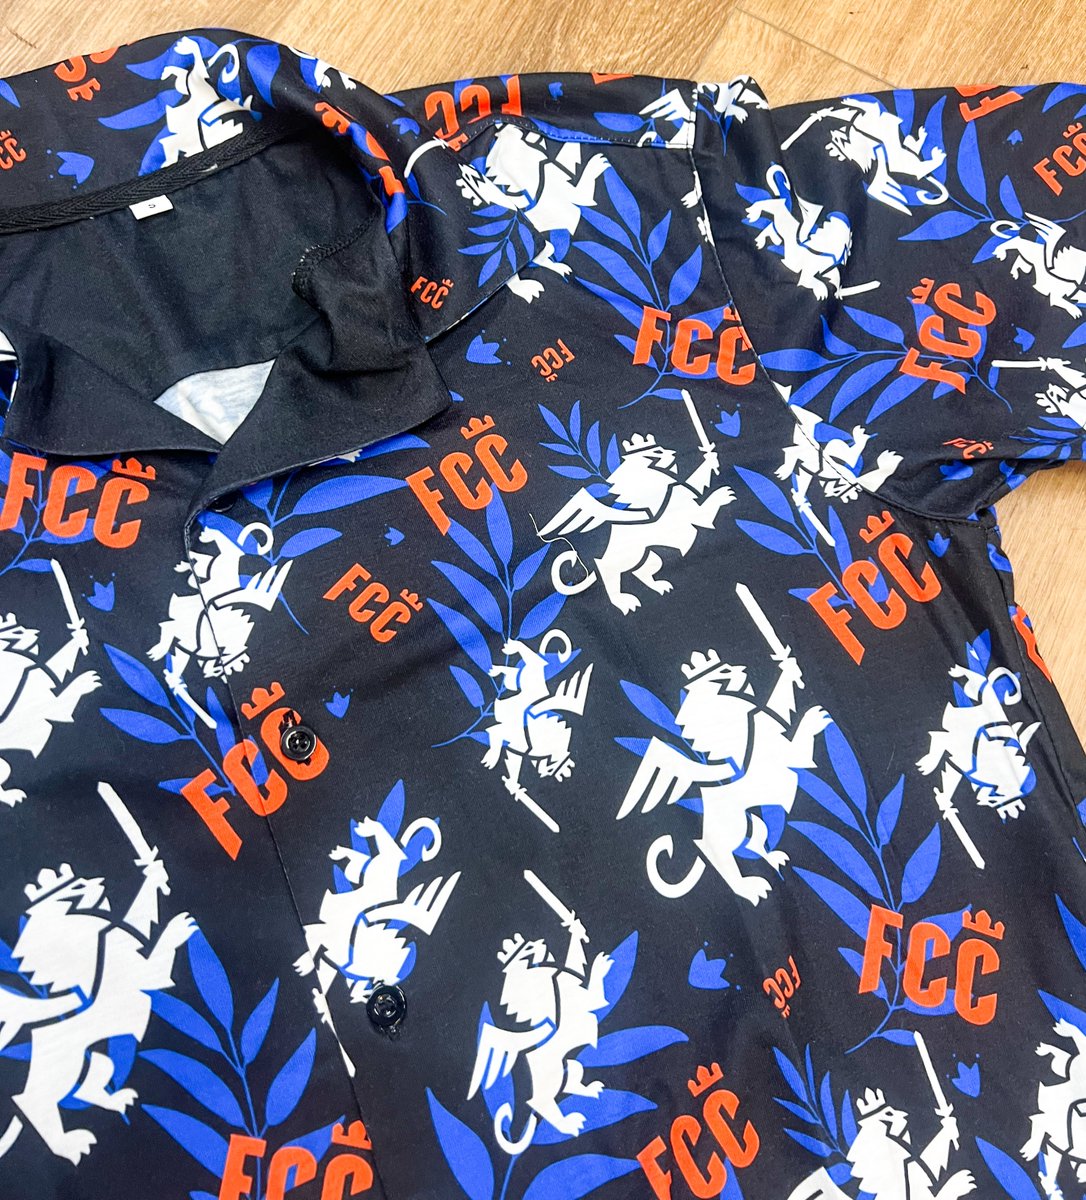 GUESS WHAT'S BACK?! 🤩 Our official @fccincinnati button-downs are back in black AND a brand new color pattern. Get yours in-stores now!